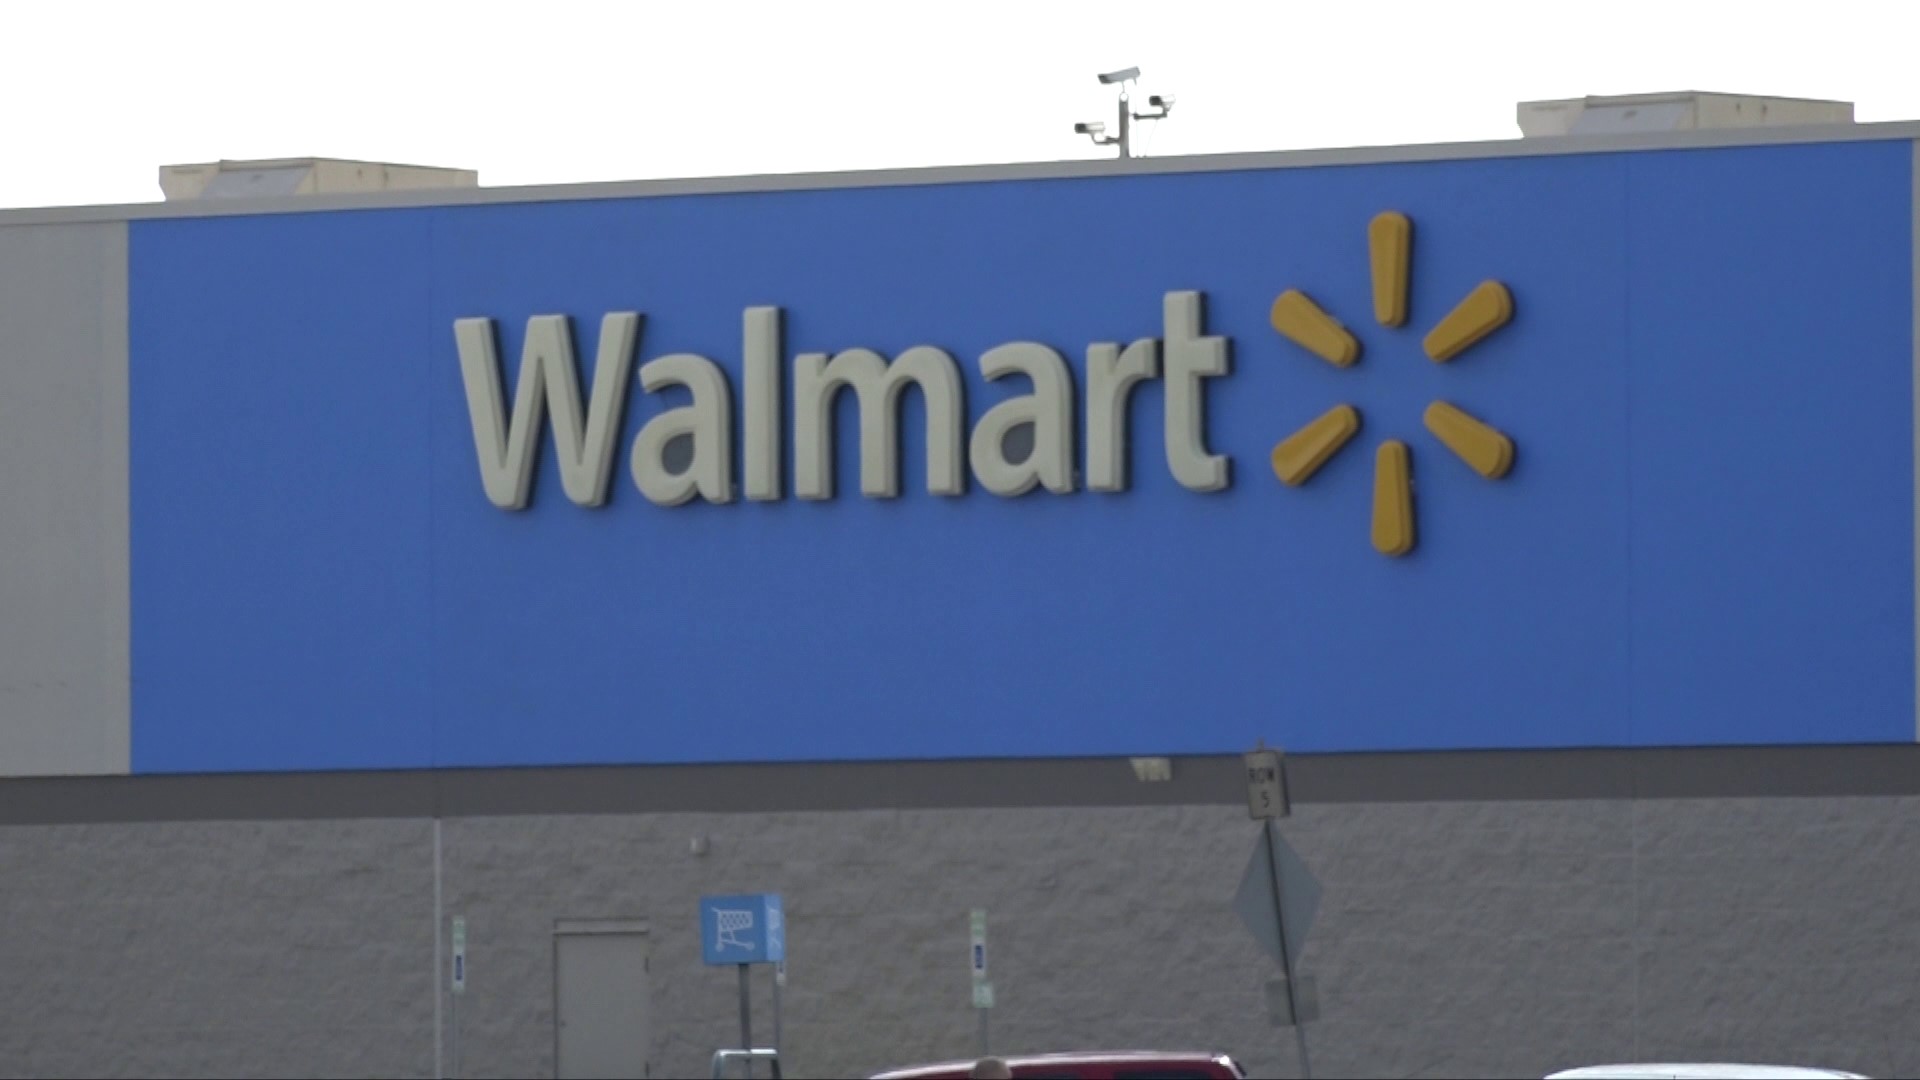 Walmart reported a strong first quarter and boosted its outlook for the year as the nation’s largest retailer continues to draw in budget-conscious consumers.